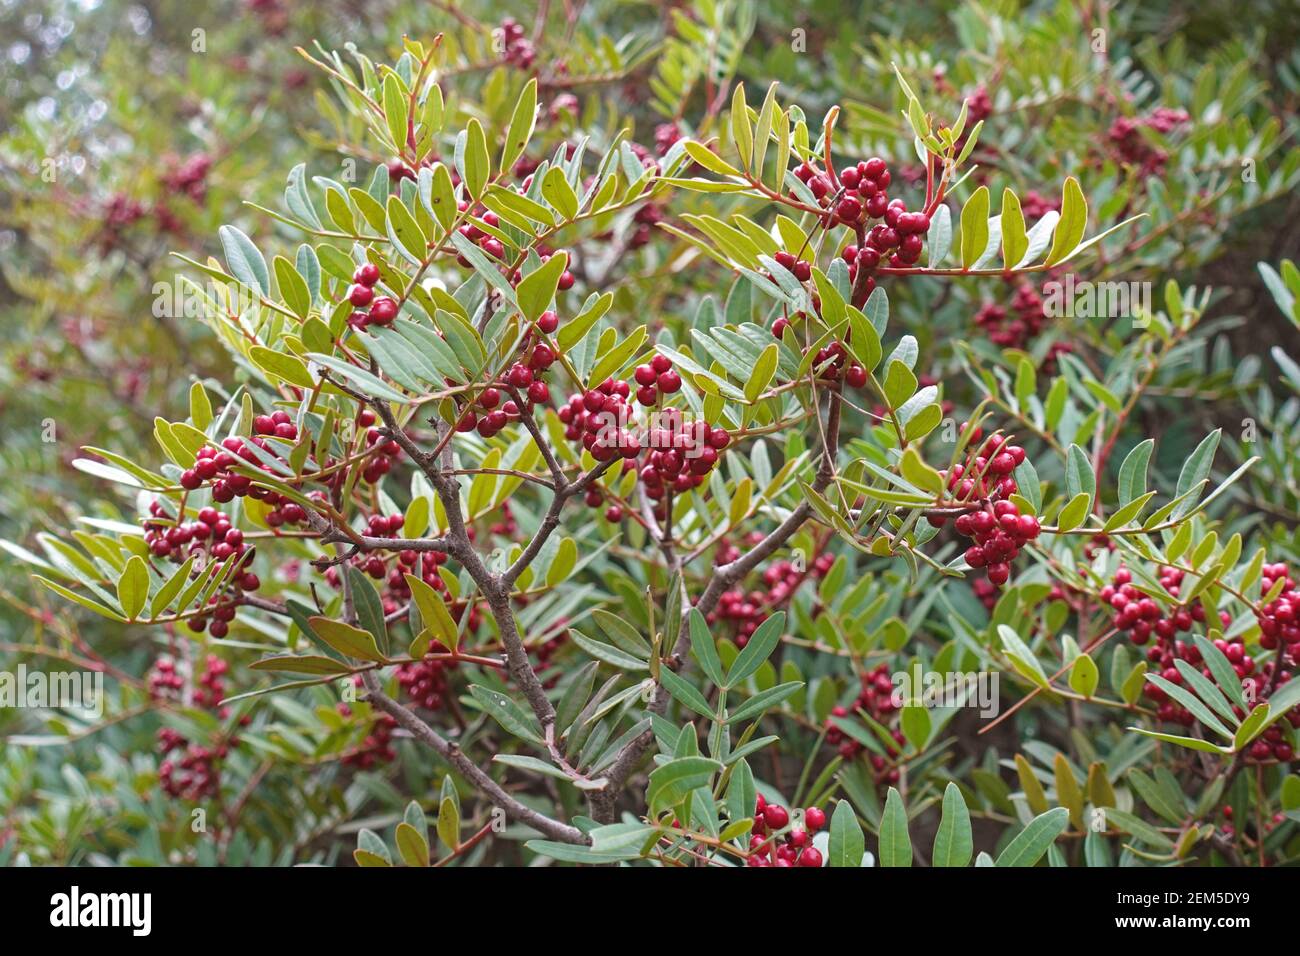 Cotoneaster shrub plant with red pome balls fruit and green leaves. Stock Photo